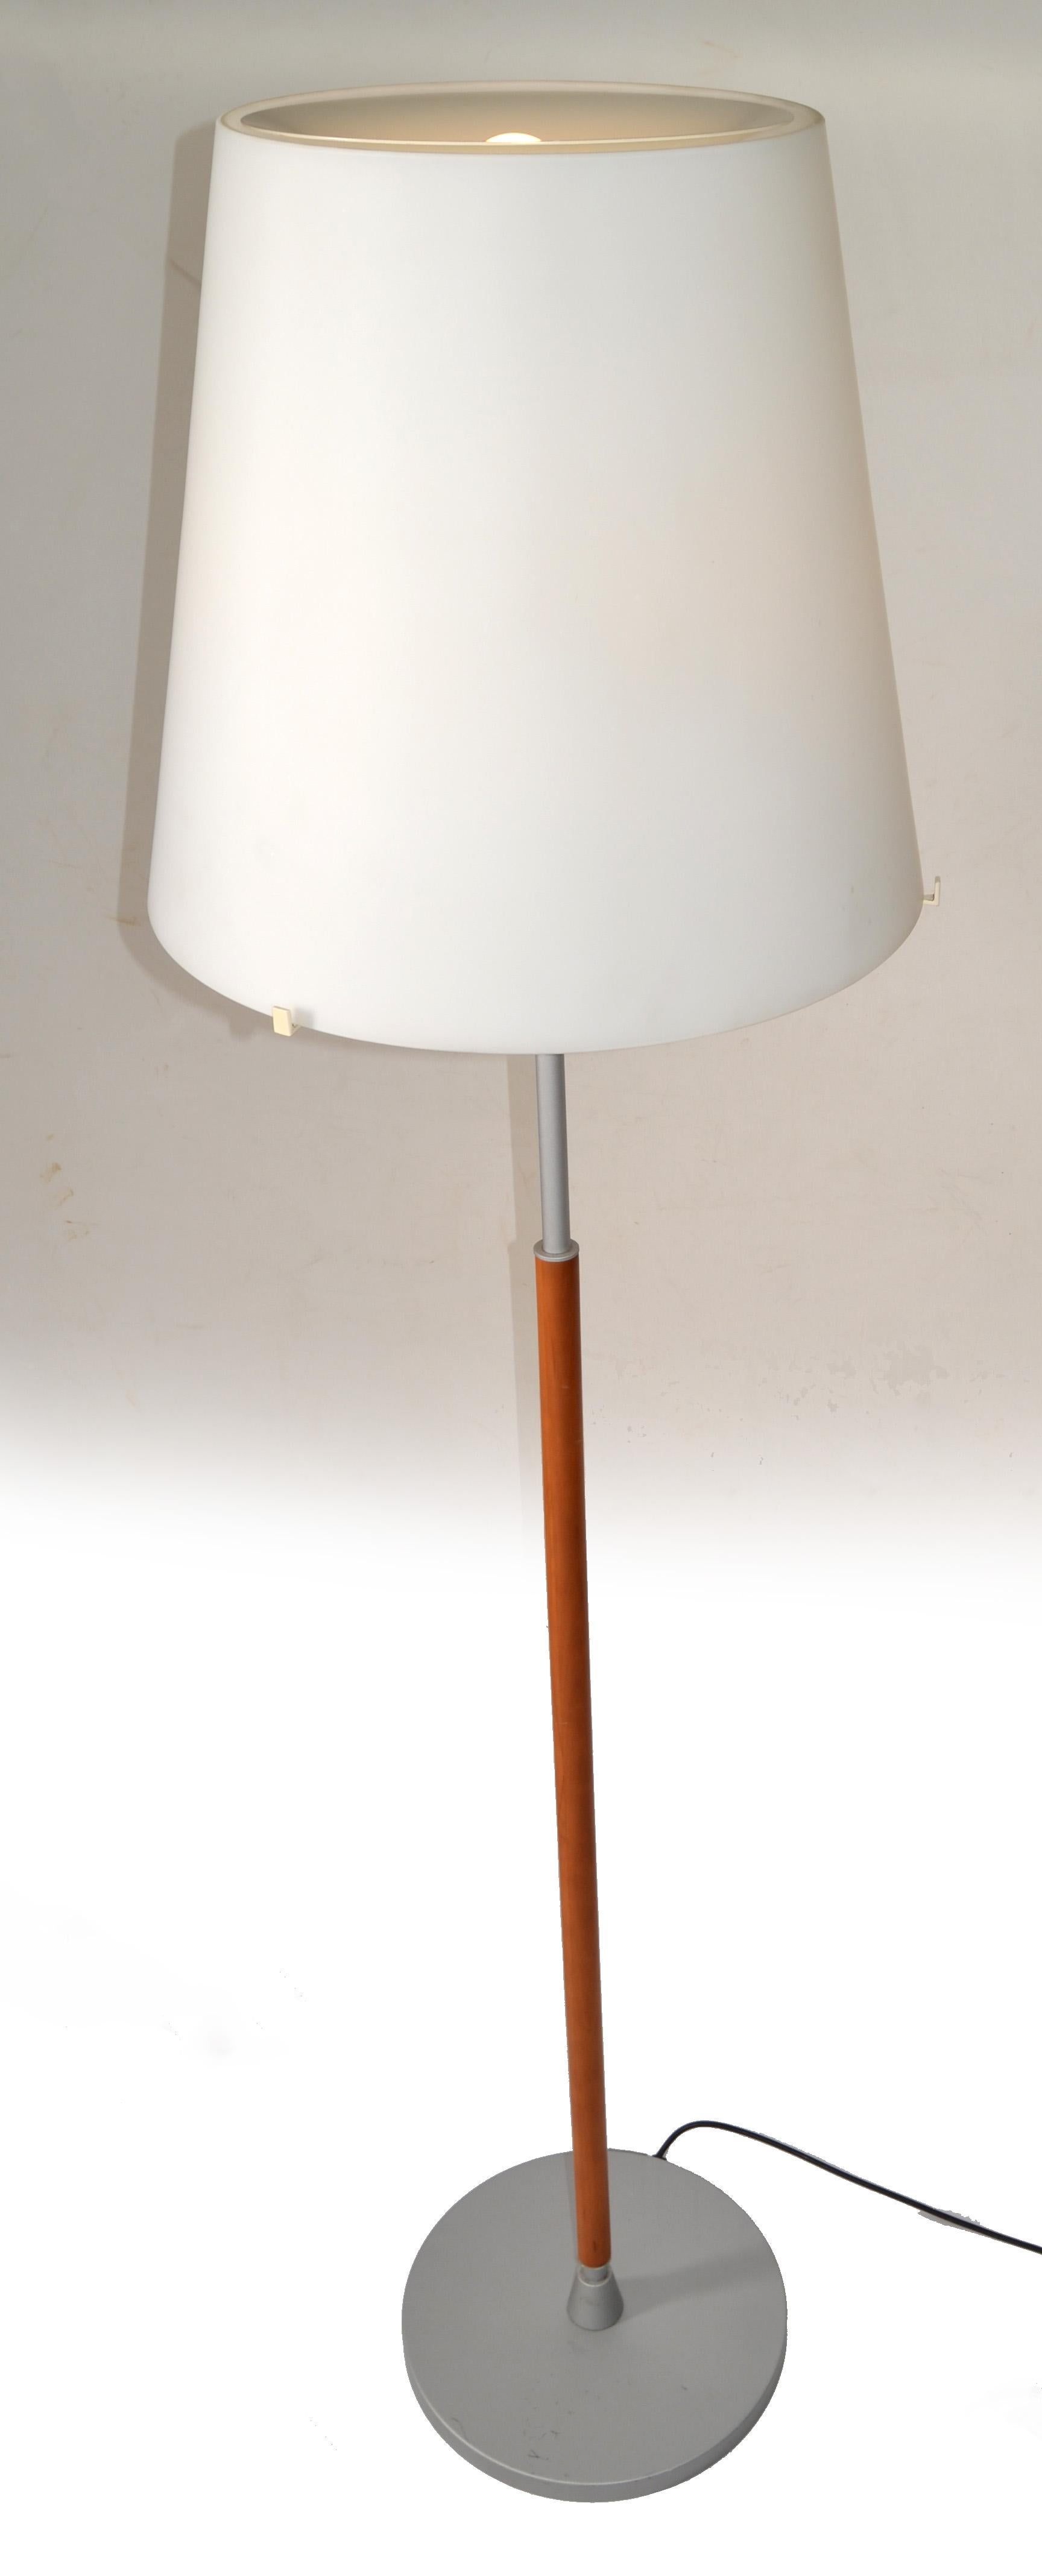 A pure and elegant modernist floor lamp designed by Archivio Storico for Fontana Arte. The 2198 Model from Fontana Arte is a classic Floor Lamp. The diffuser is in satin white blown glass. The stem is finished in a golden pear-tree wood, while the